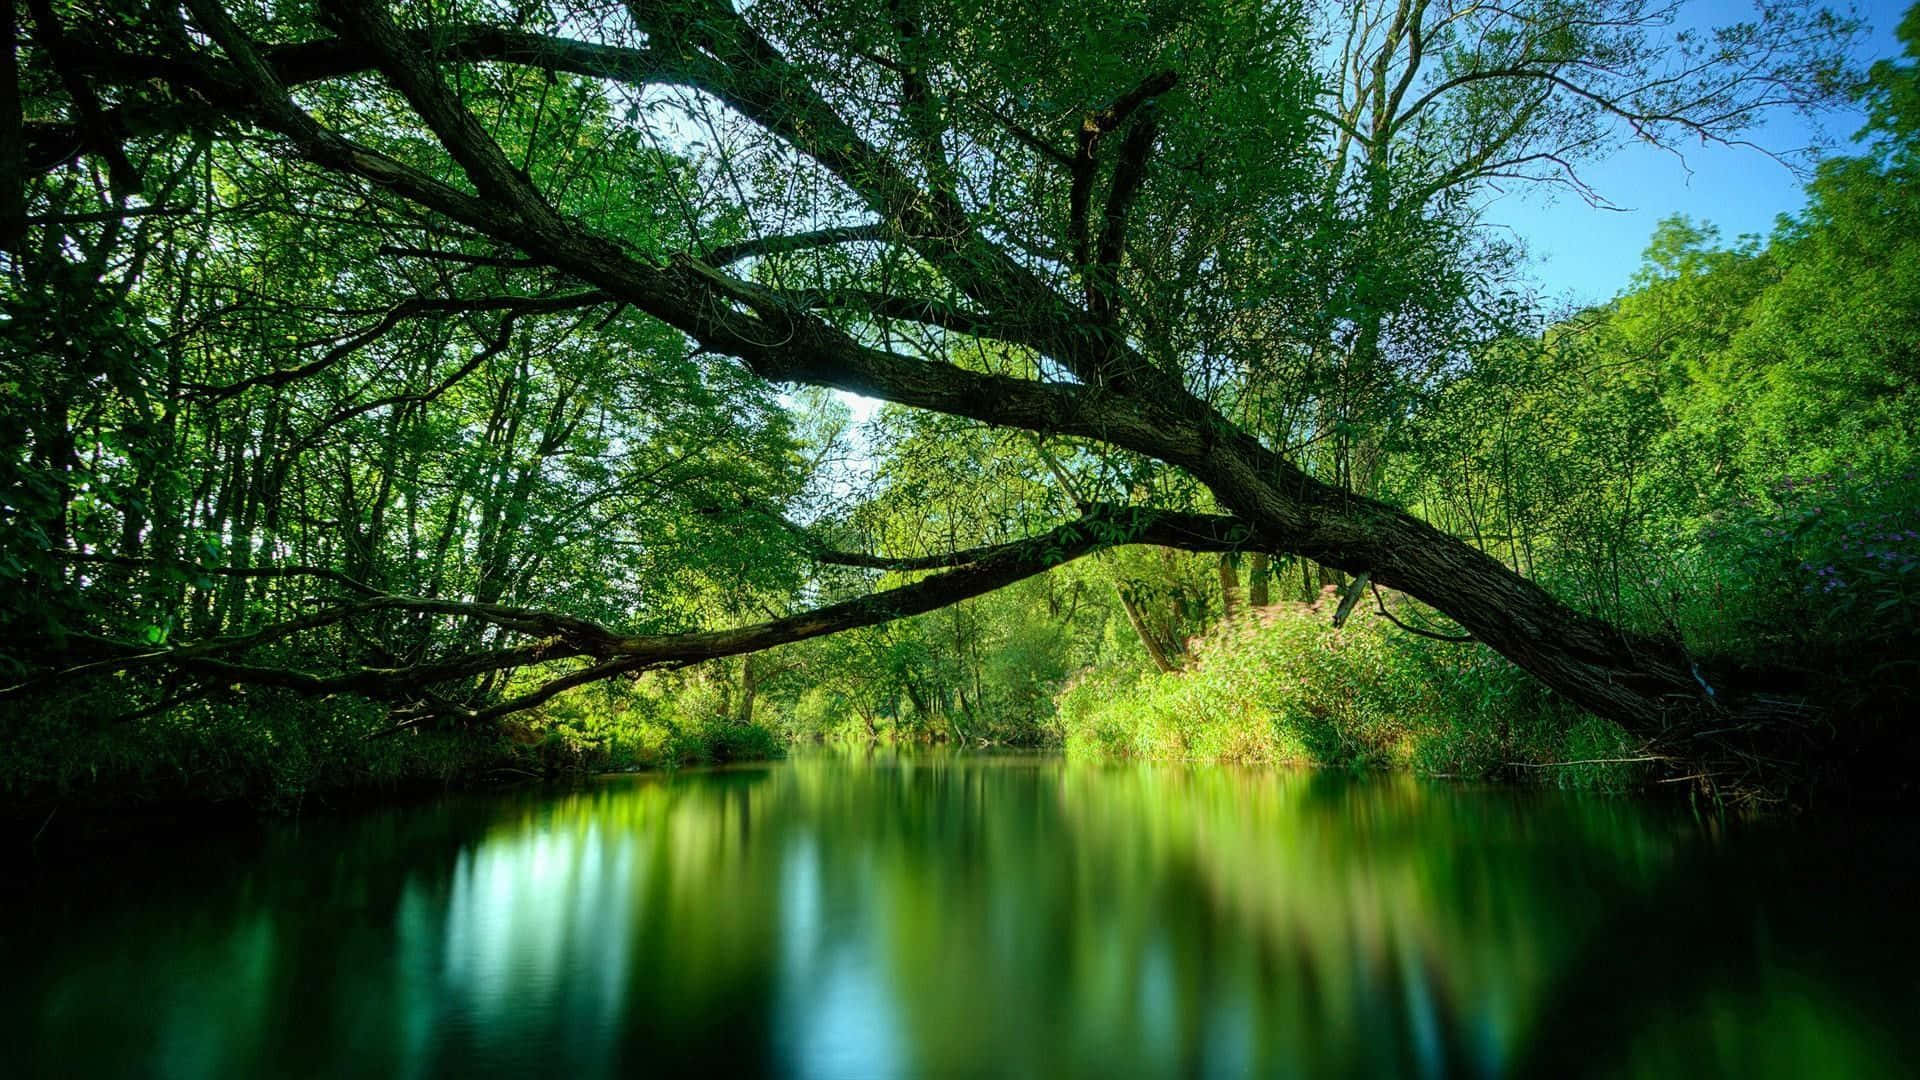 Wild Green Nature Screen Saver Picture